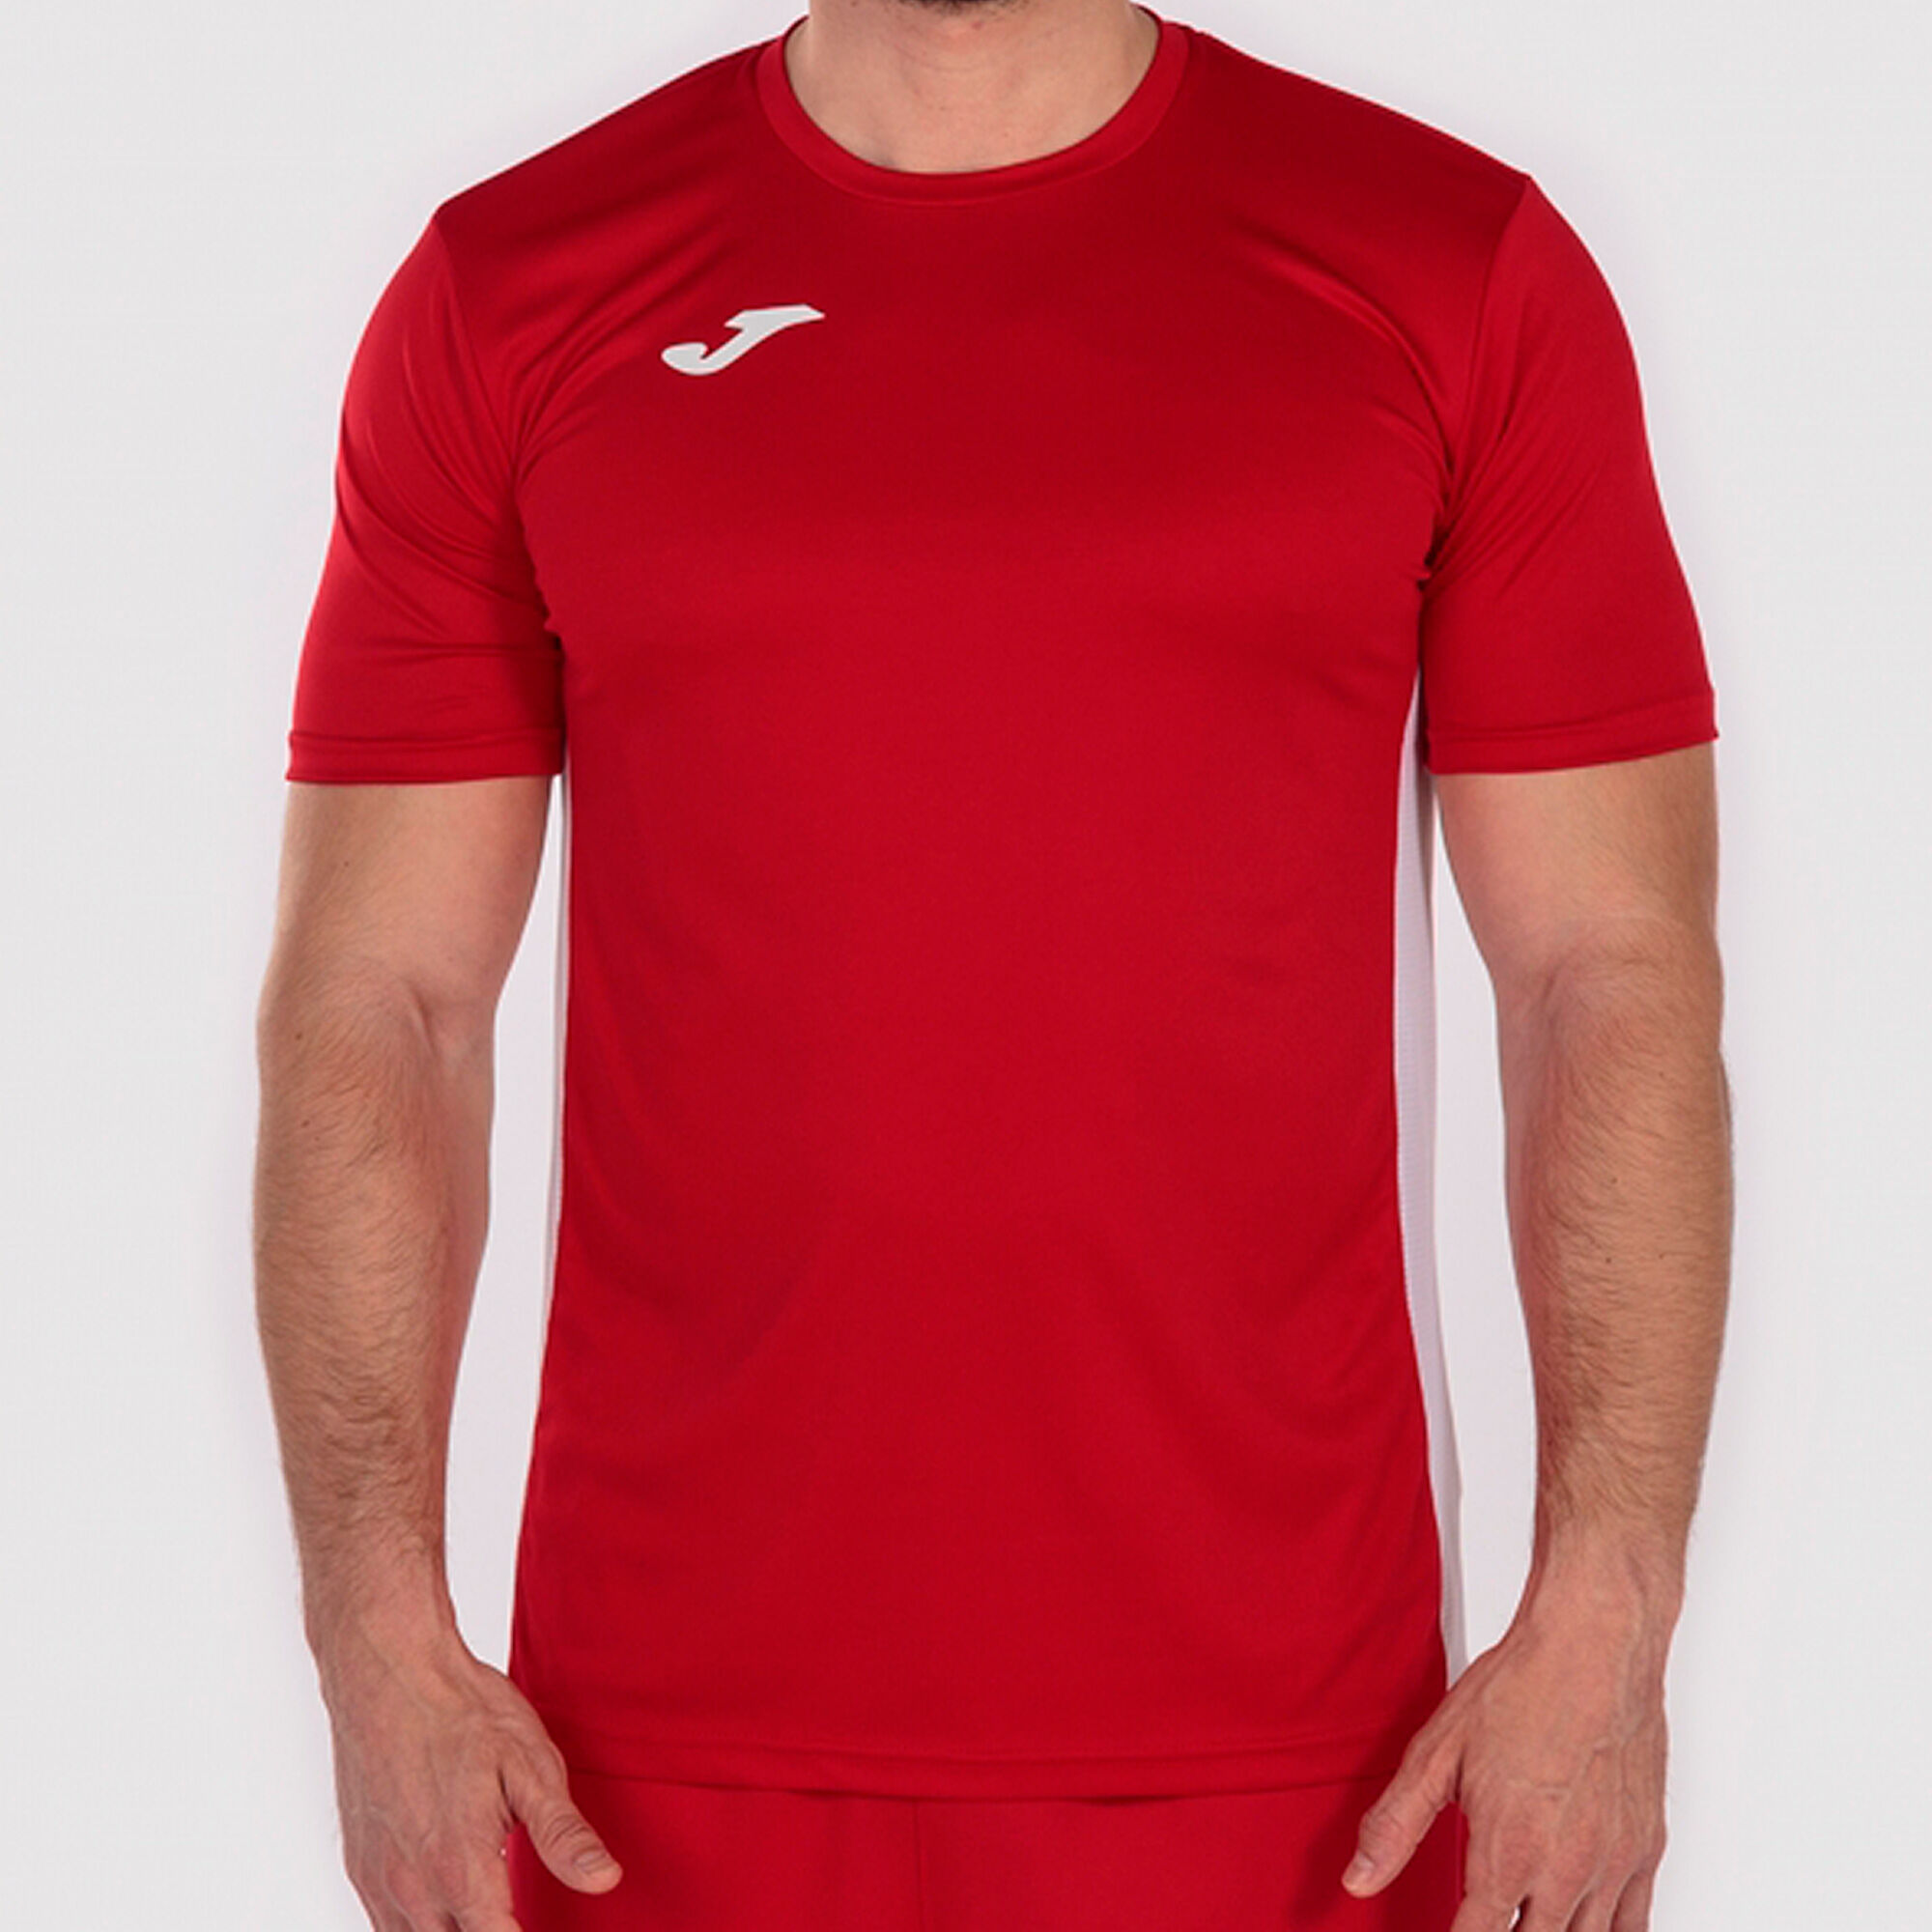 MAILLOT MANCHES COURTES HOMME COSENZA ROUGE BLANC